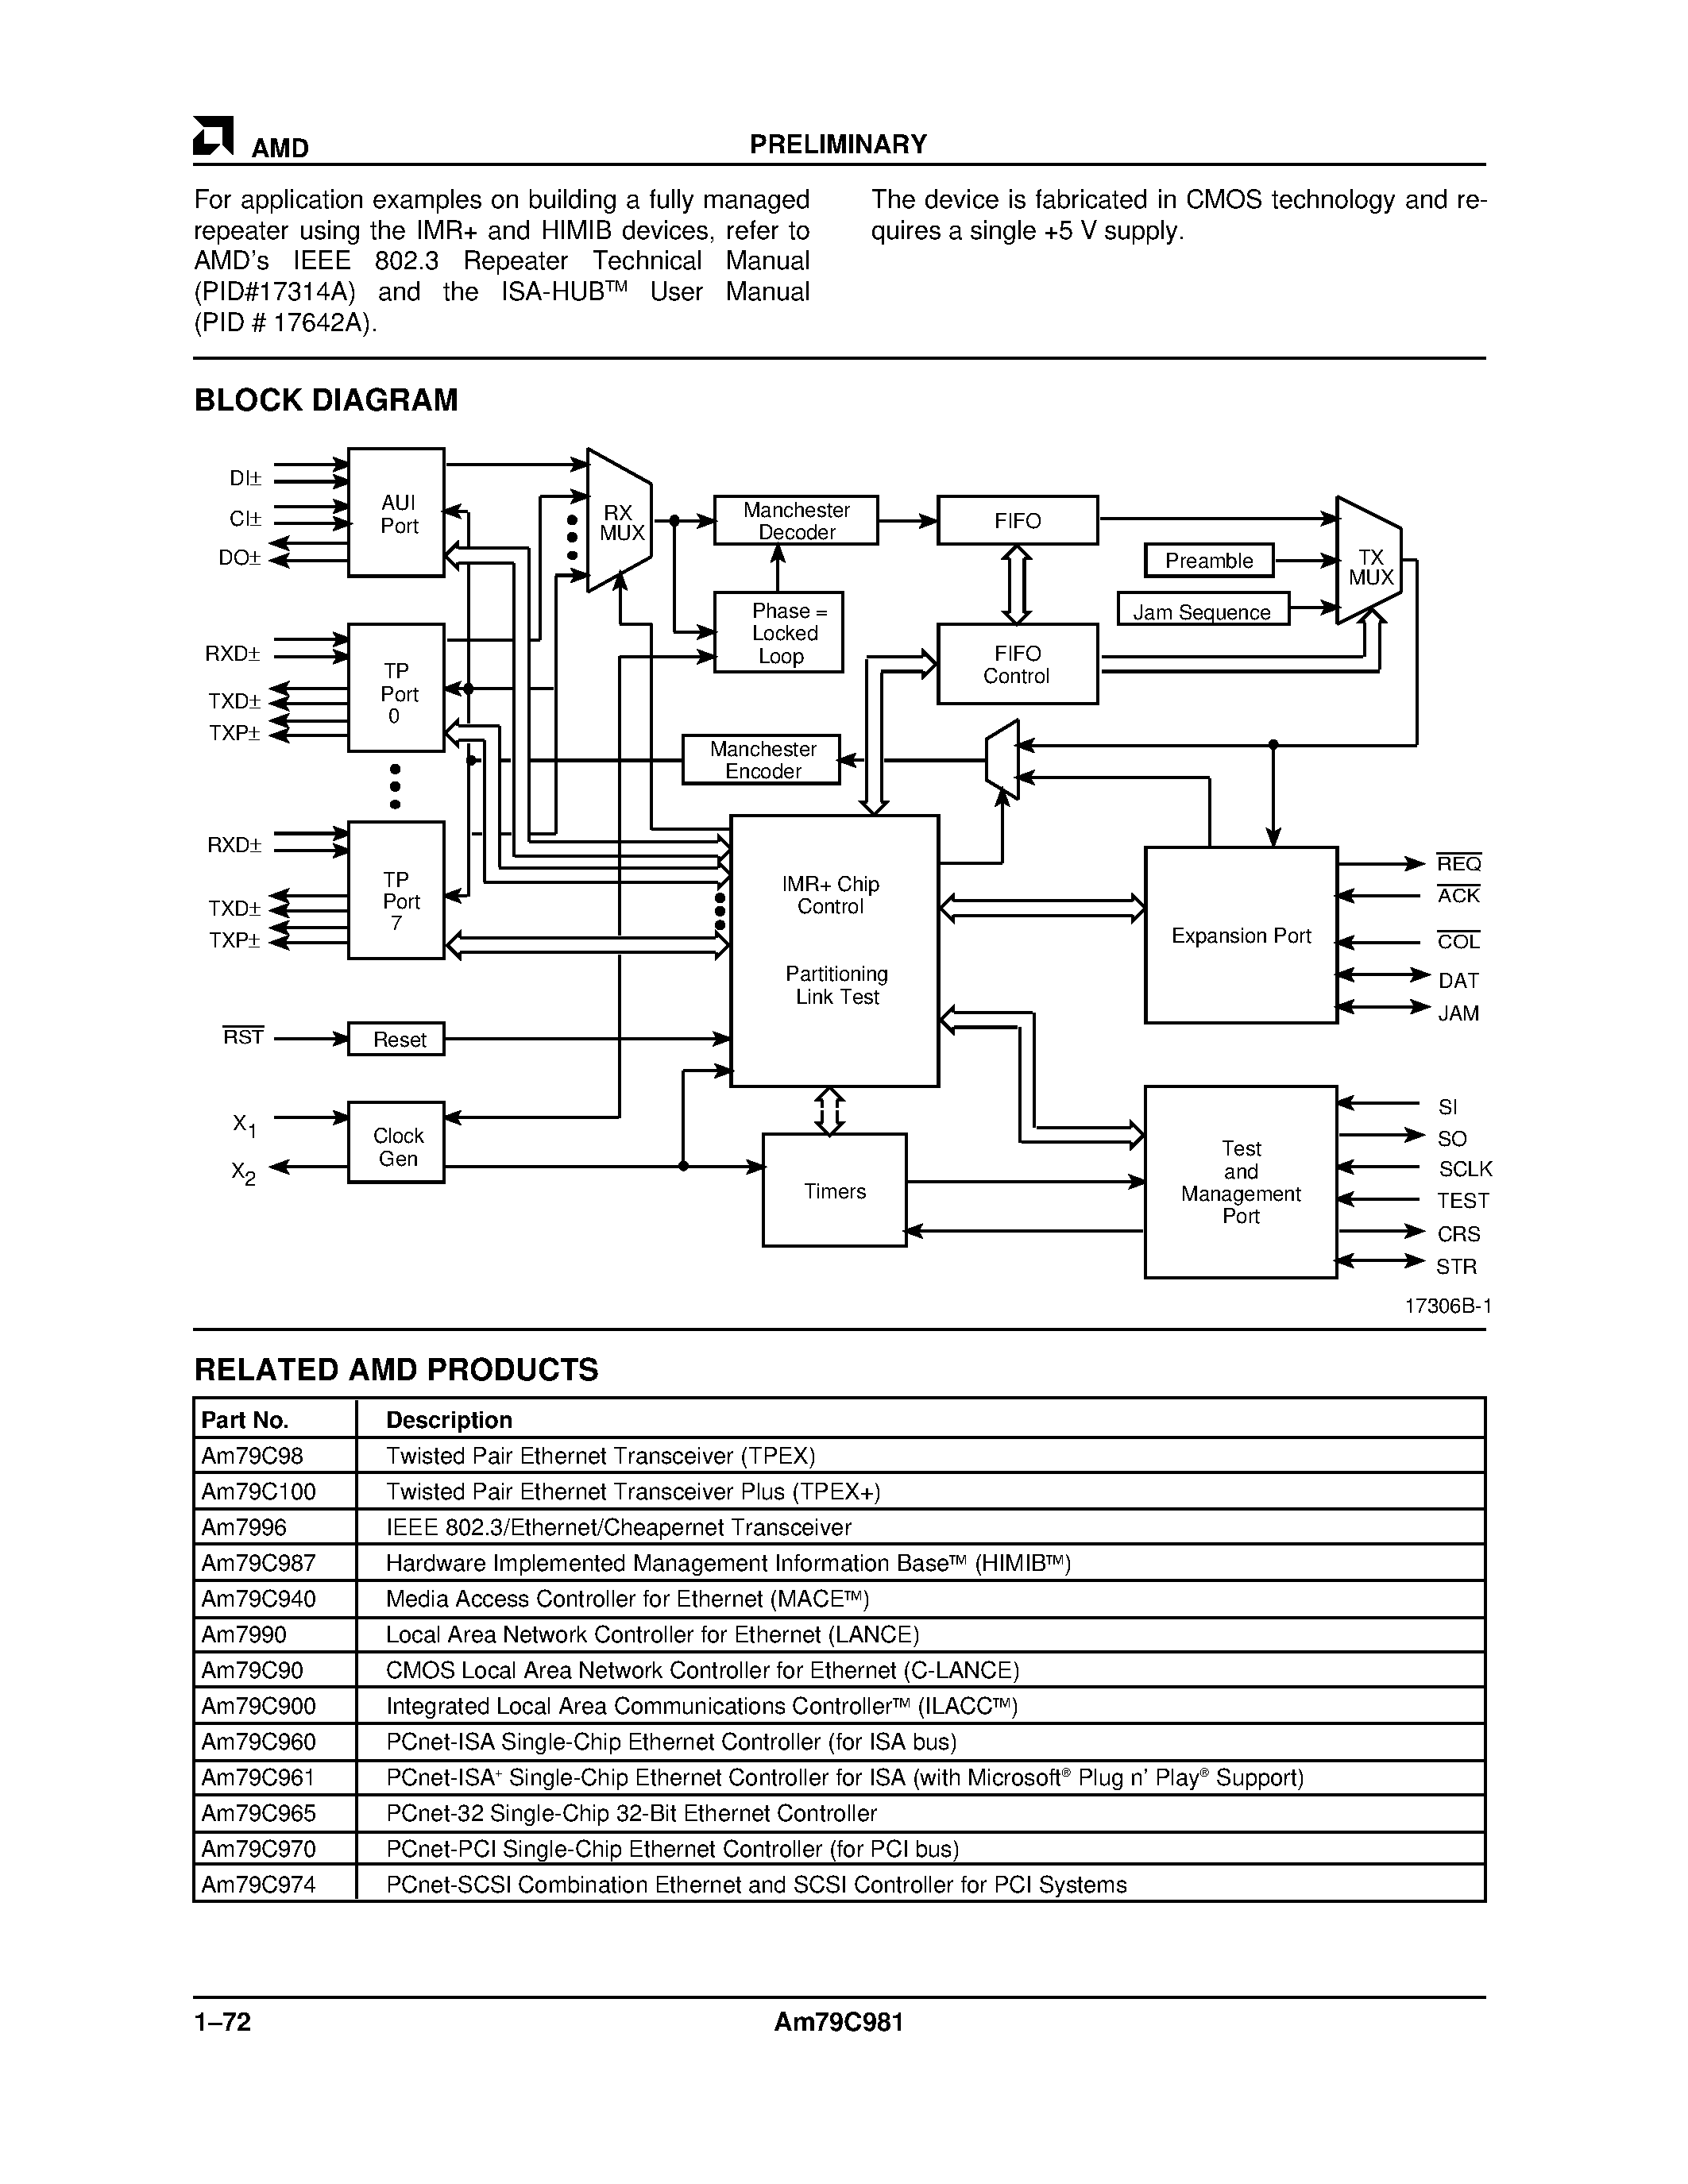 Datasheet AM79C981 - Integrated Multiport Repeater Plus (IMR+) page 2